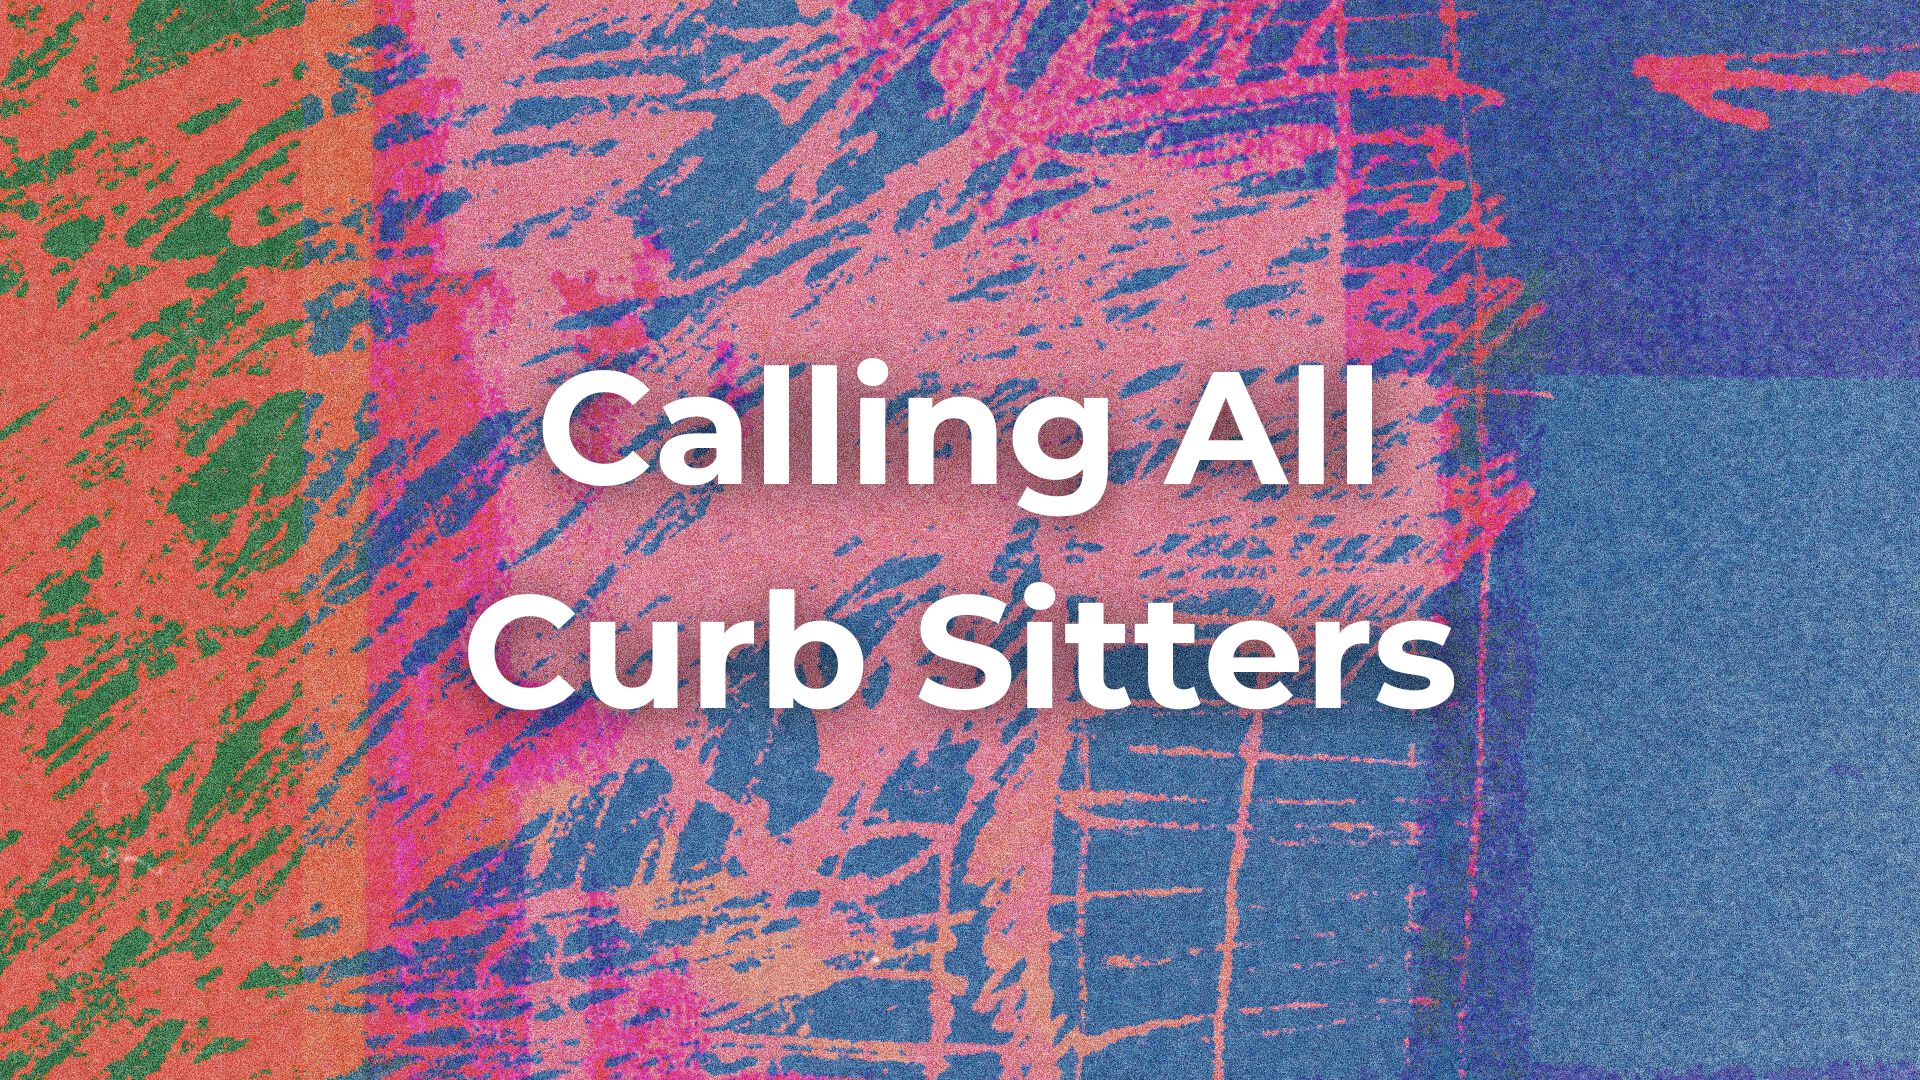 Calling All Curb Sitters